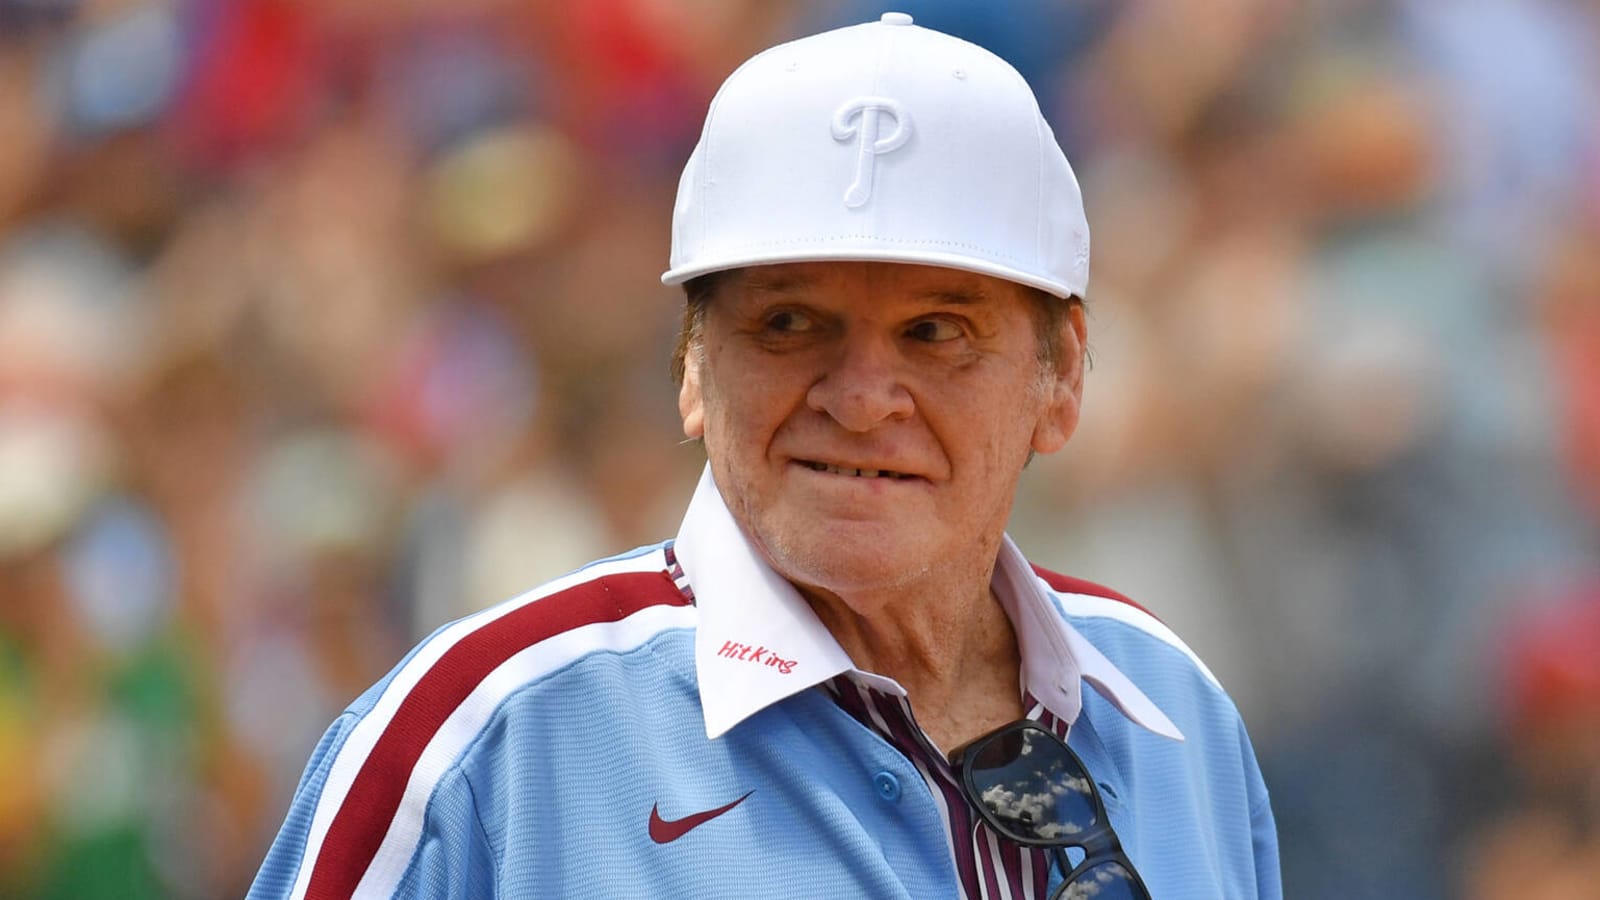 Pete Rose places Ohio's first legal sports bet on Reds to win 2023